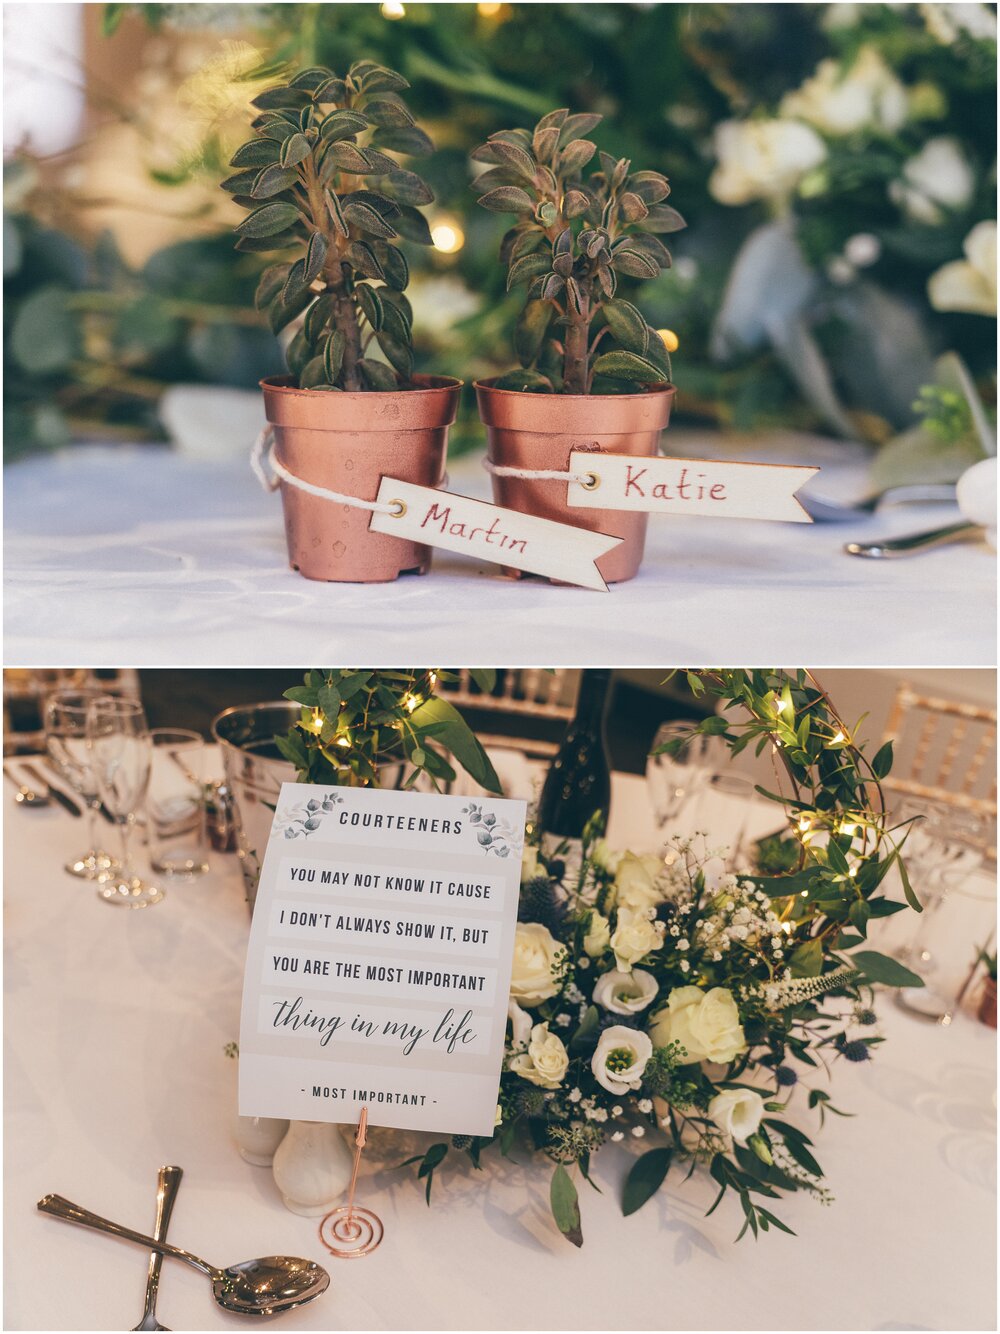 Wedding details for a foliage themed table plan Wedding ceremony at Quarry Bank Mill wedding in Cheshire near to Manchester.